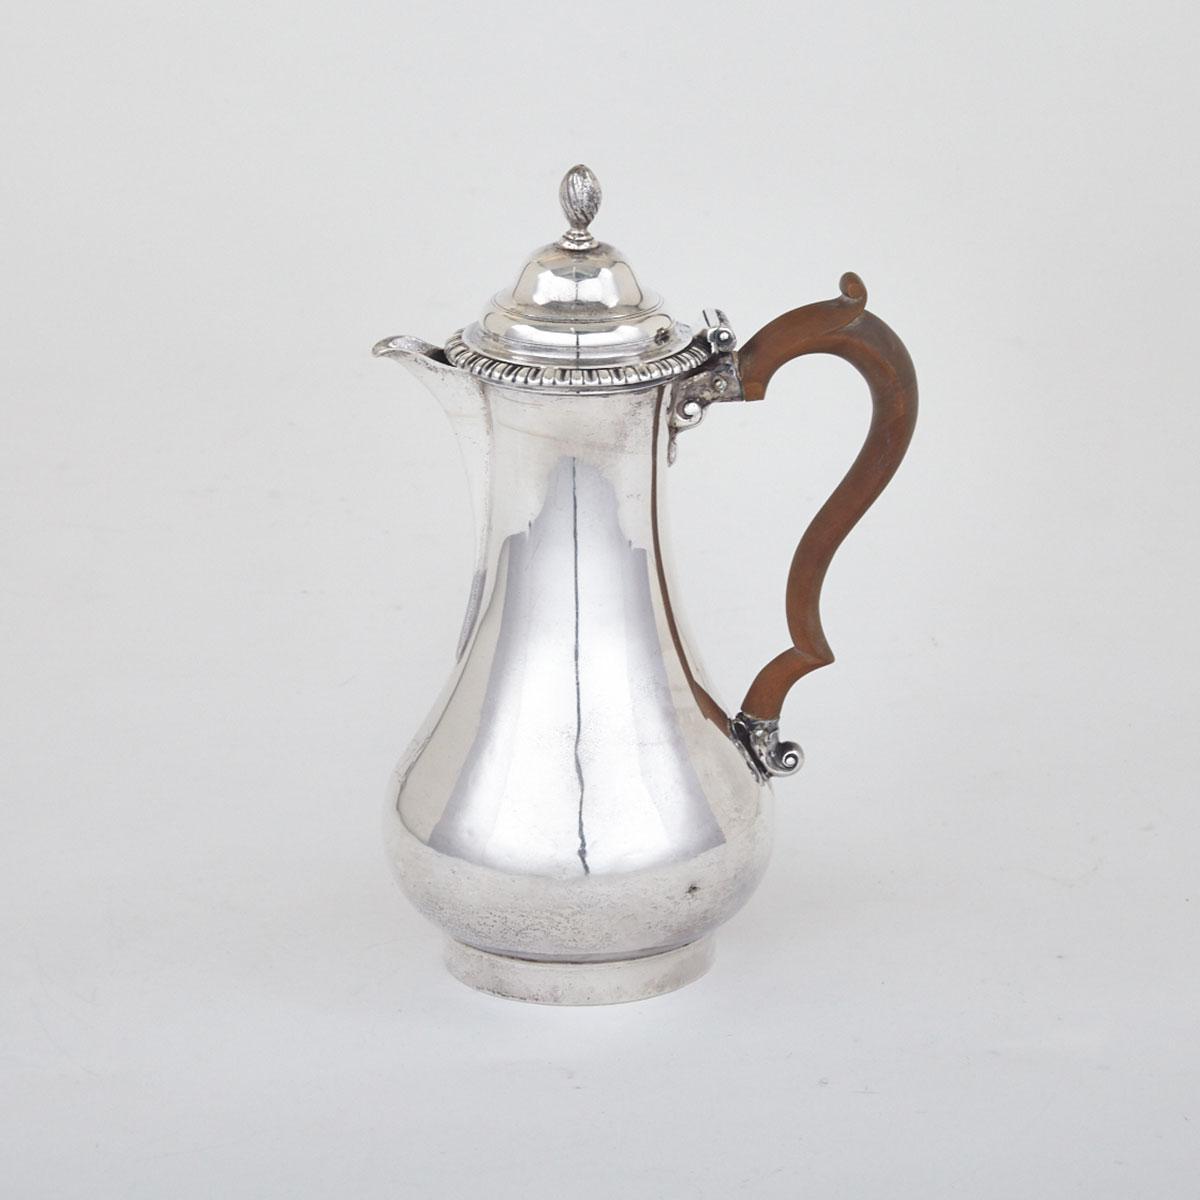 George III Silver Hot Water Pot, Thomas Whipham & Charles Wright, London, 1764